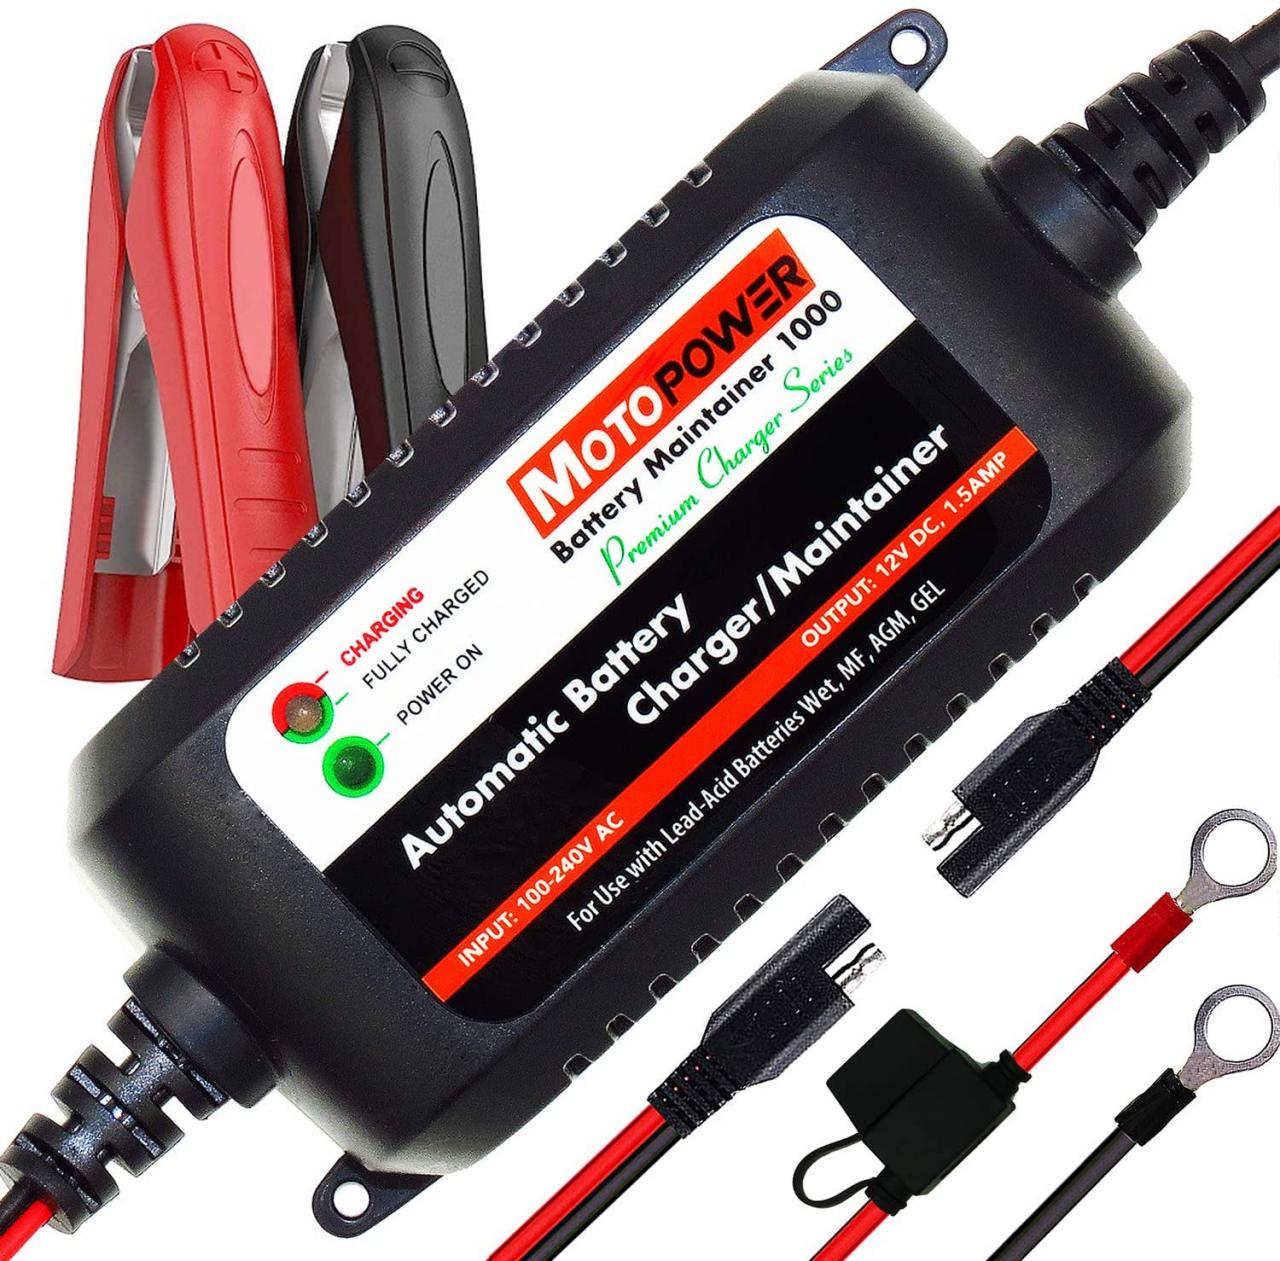 Motoworld Philippines - The Battery Tender Power Tender Plus High  Efficiency is a 5 amp battery charger that will fully charge and maintain a  battery at its proper storage voltage without the